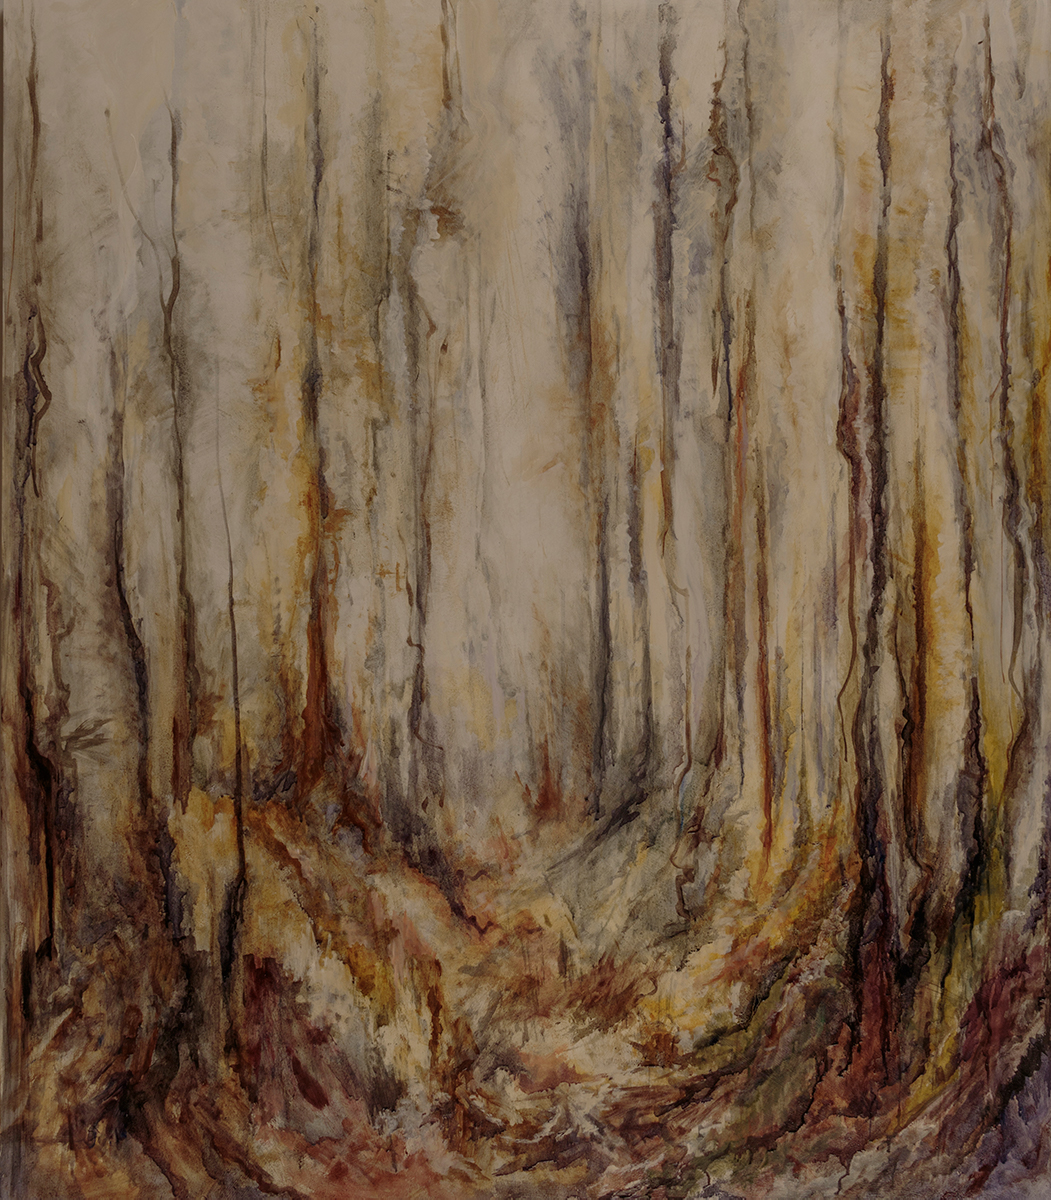 15-untitiled-ethereal-series-10-2020-oil-on-foam-core-40-x-46_-small